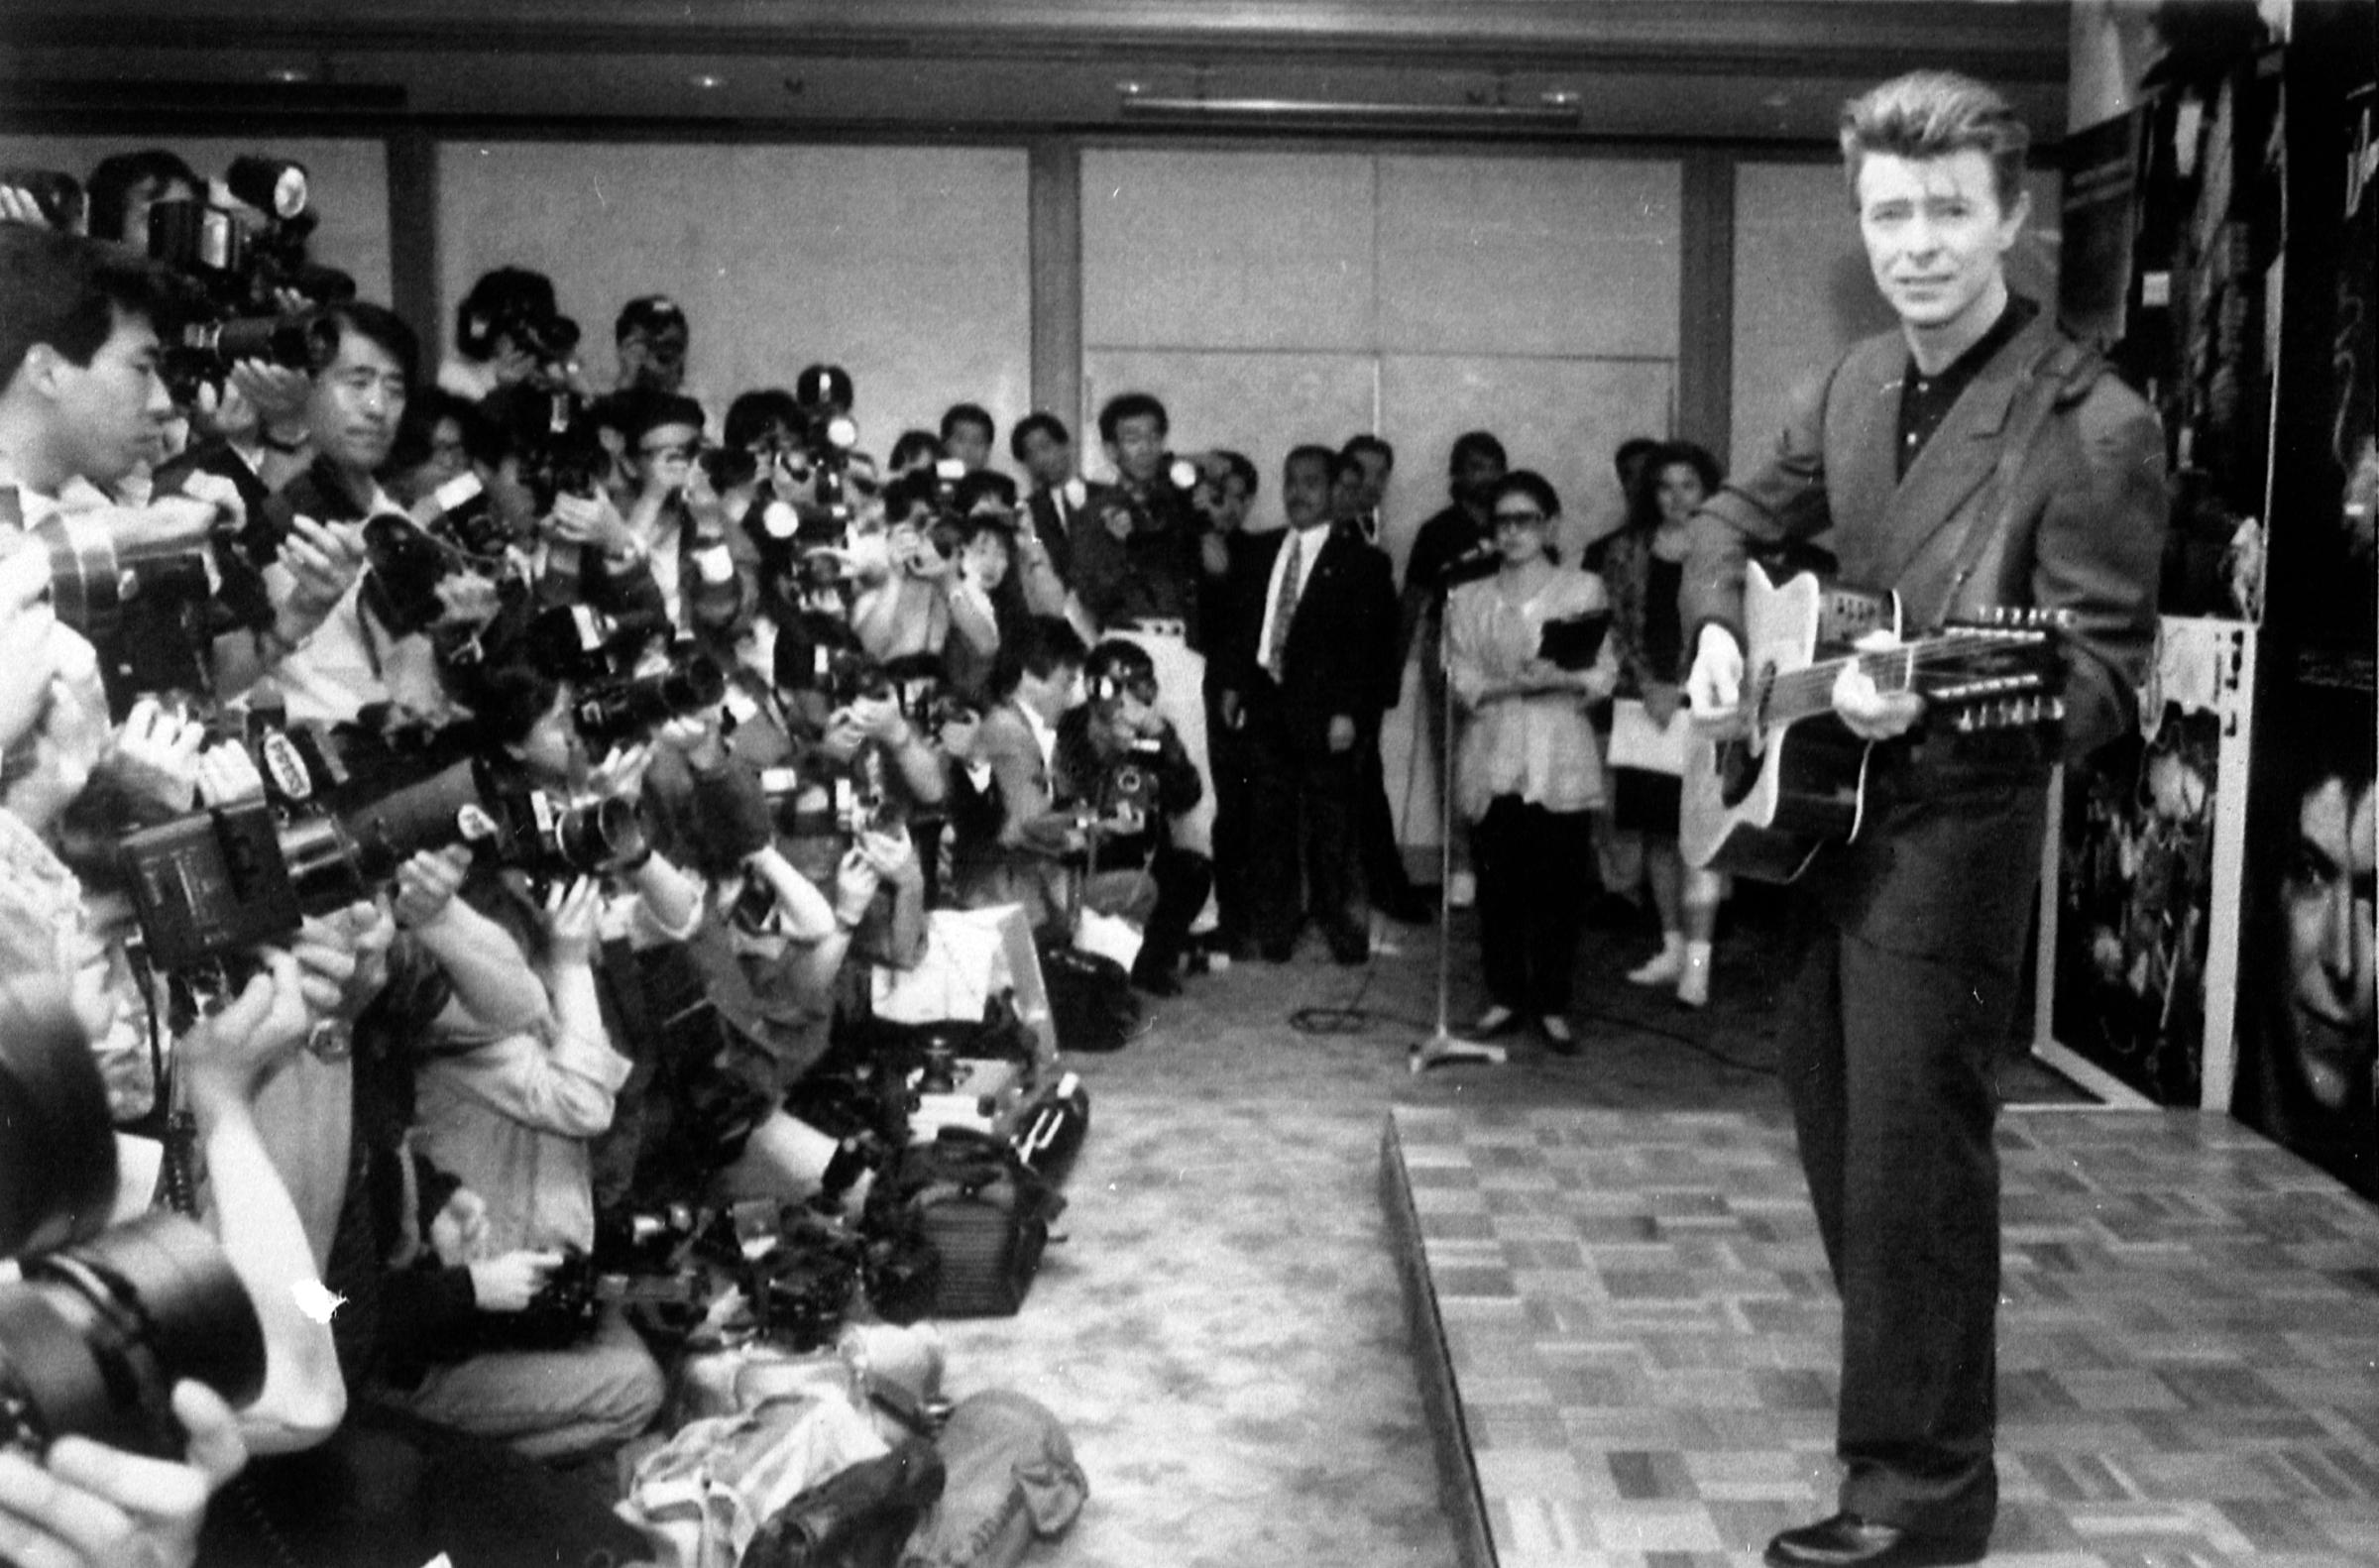 David Bowie plays an acoustic guitar while being photographed at a press conference in Tokyo on May 19, 1990.